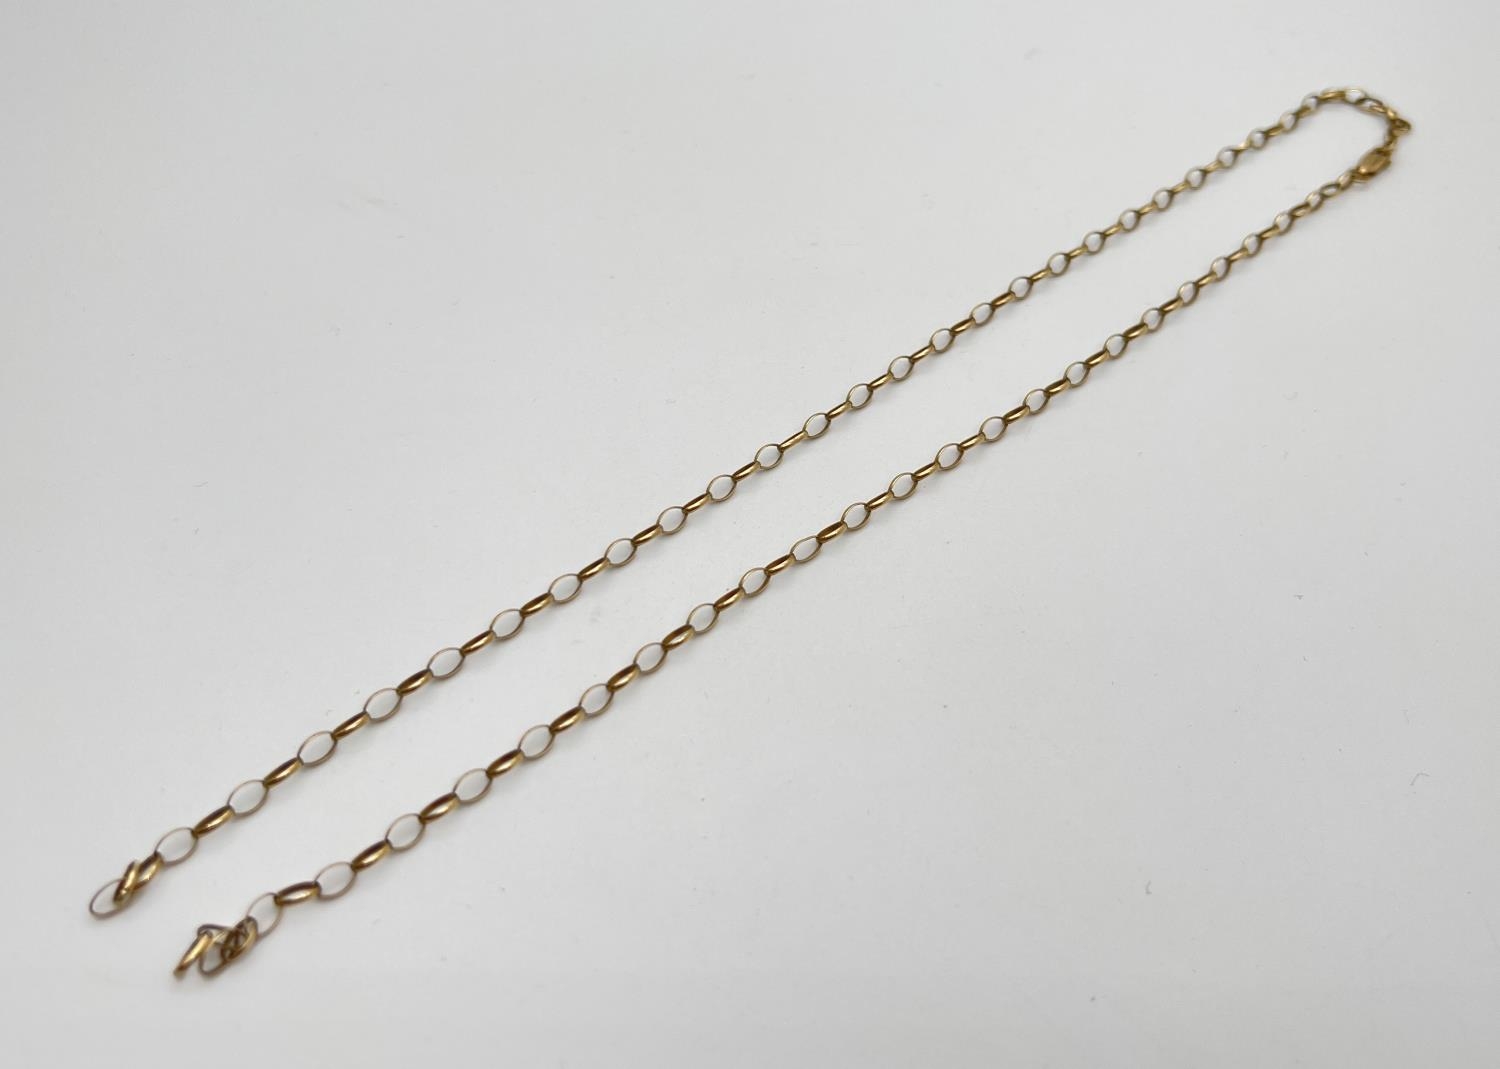 A 9ct gold 24" belcher chain with lobster claw clasp for repair or scrap. Total weight approx. 6.4g.